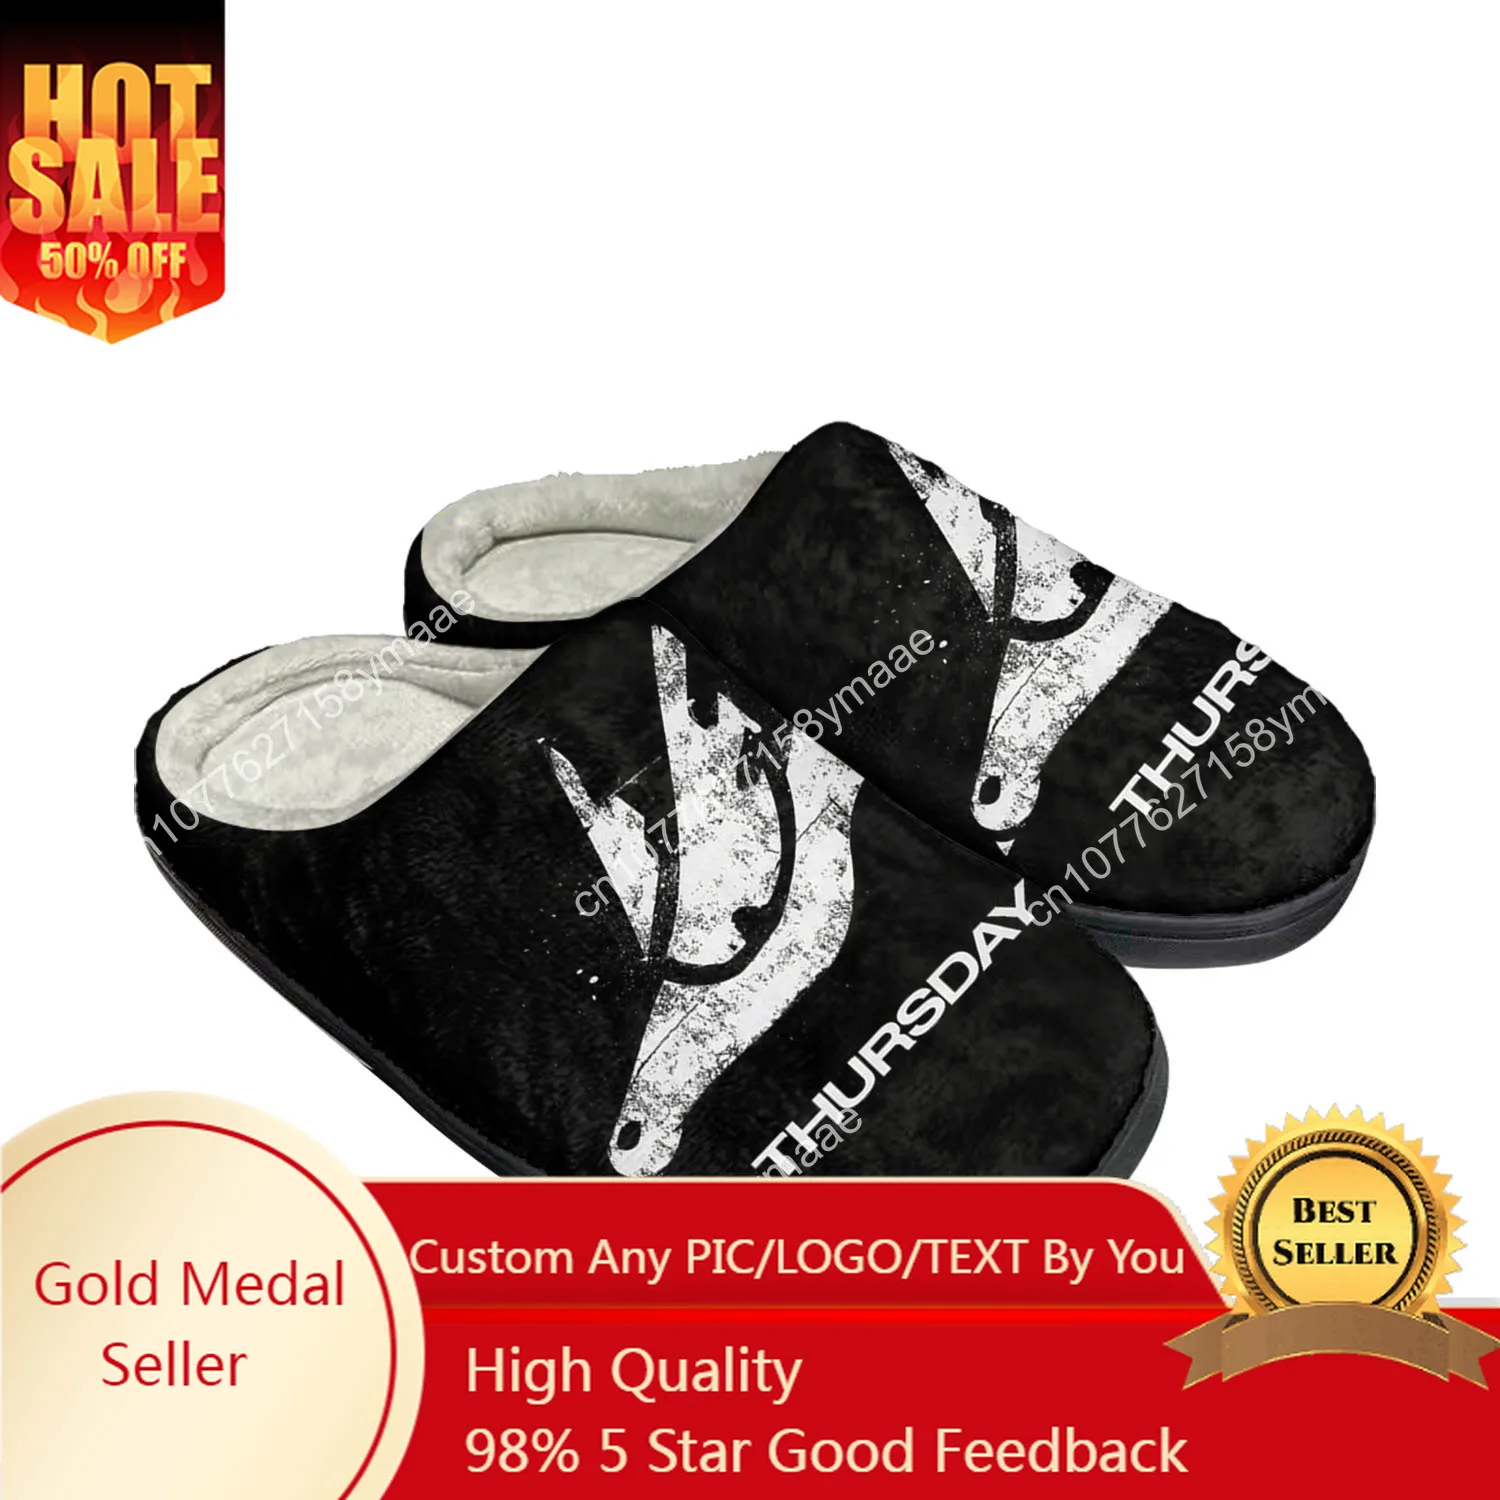 Thursday Band Home Cotton Slippers Mens Womens Plush Bedroom Casual Keep Warm Shoes Thermal Indoor Slipper Customized Shoe mens home non slip gingham slippers winter warm indoor slipper shoes platform man comfortable fur shoe male bedroom footwear new